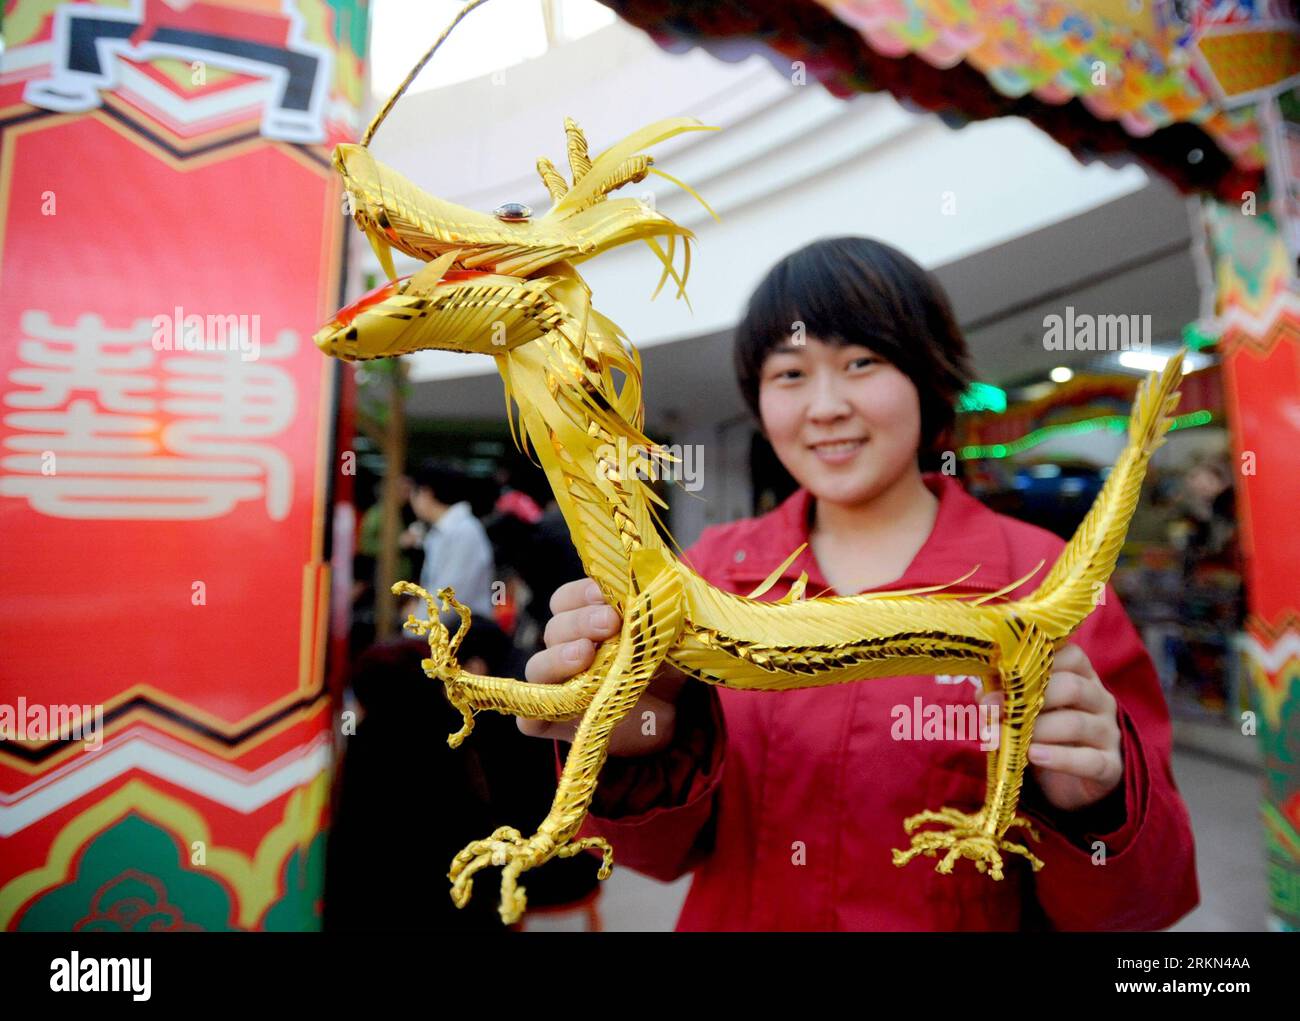 Bildnummer: 56968462  Datum: 25.01.2012  Copyright: imago/Xinhua (120126) -- SHENYANG, Jan. 26, 2012 (Xinhua) -- A folk artist shows dragon-shaped handicraft made by rope weaving in Shenyang, capital of northeast China s Liaoning Province, Jan. 25, 2012. Handicrafts inspired by dragon became very popular in China as the Spring Festival, which fell on Jan. 23, marked the start of the Year of Dragon according to the Chinese zodiac. (Xinhua/Zhang Wenkui) (ry) CHINA-DRAGON-IMAGE-POPULARITY (CN) PUBLICATIONxNOTxINxCHN Gesellschaft Tradition Figur Jahr des Drachen xbs x0x 2012 quer      56968462 Dat Stock Photo